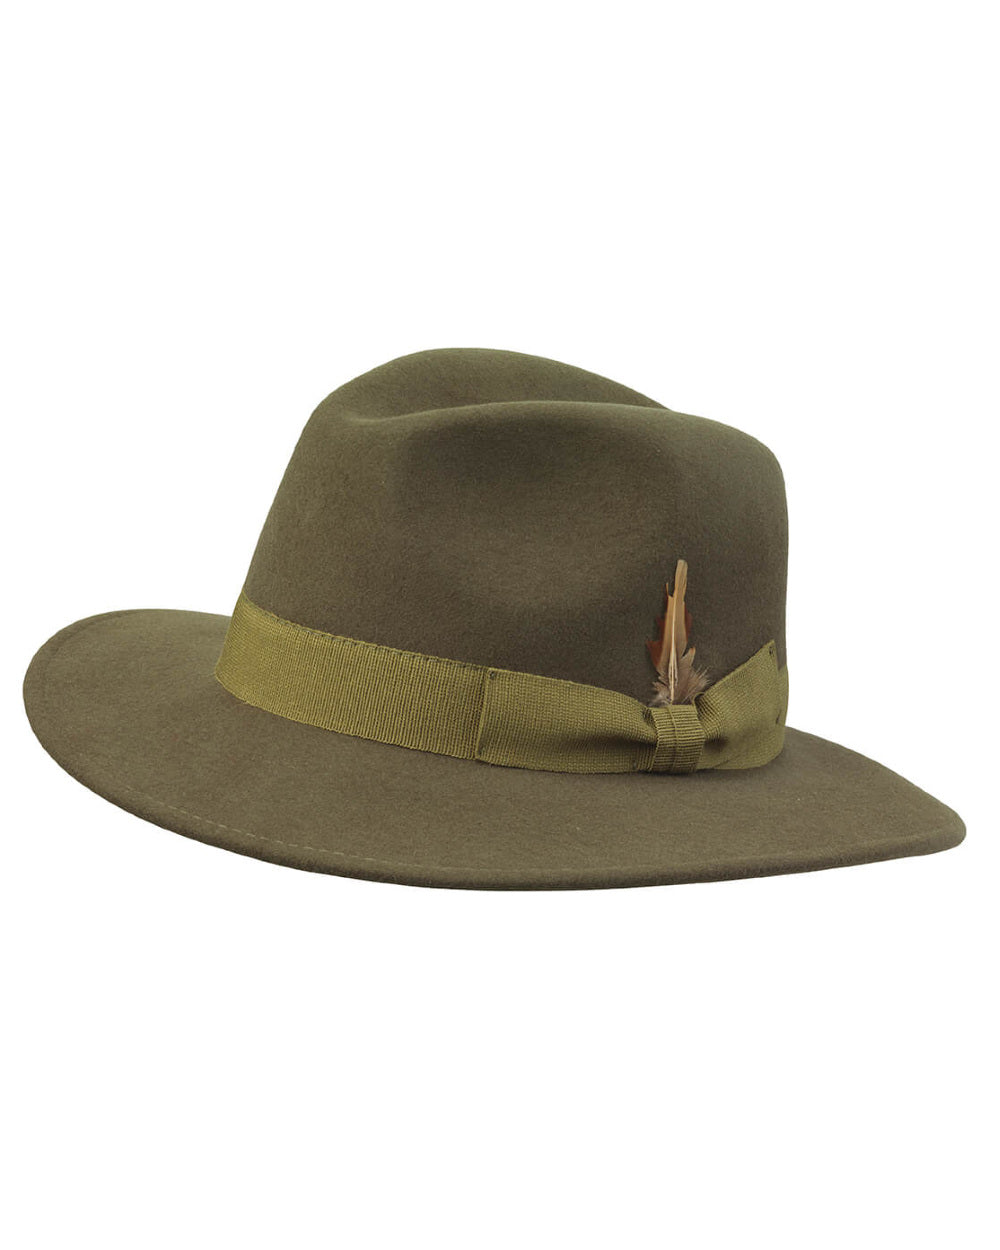 Loden Coloured Laksen Heritage Fedora Cashmere Hat On A White Background 